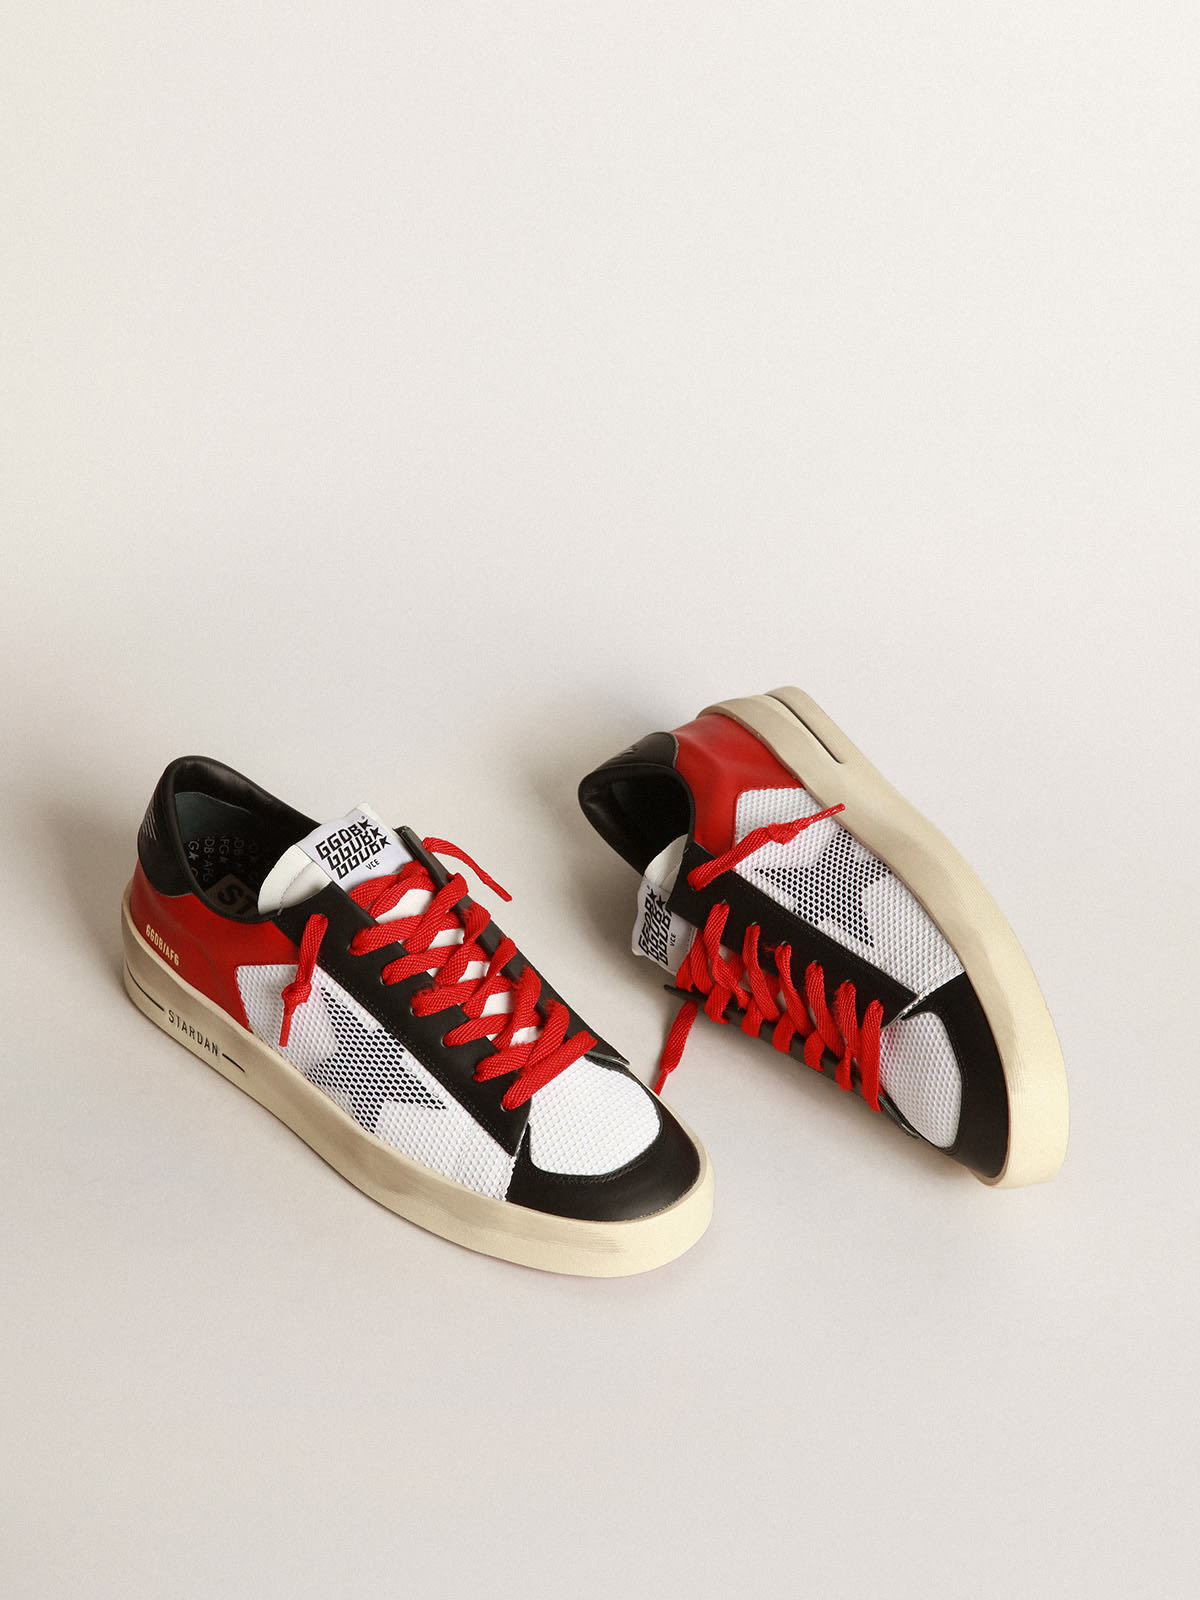 Golden Goose - Stardan sneakers in leather with mesh inserts in 